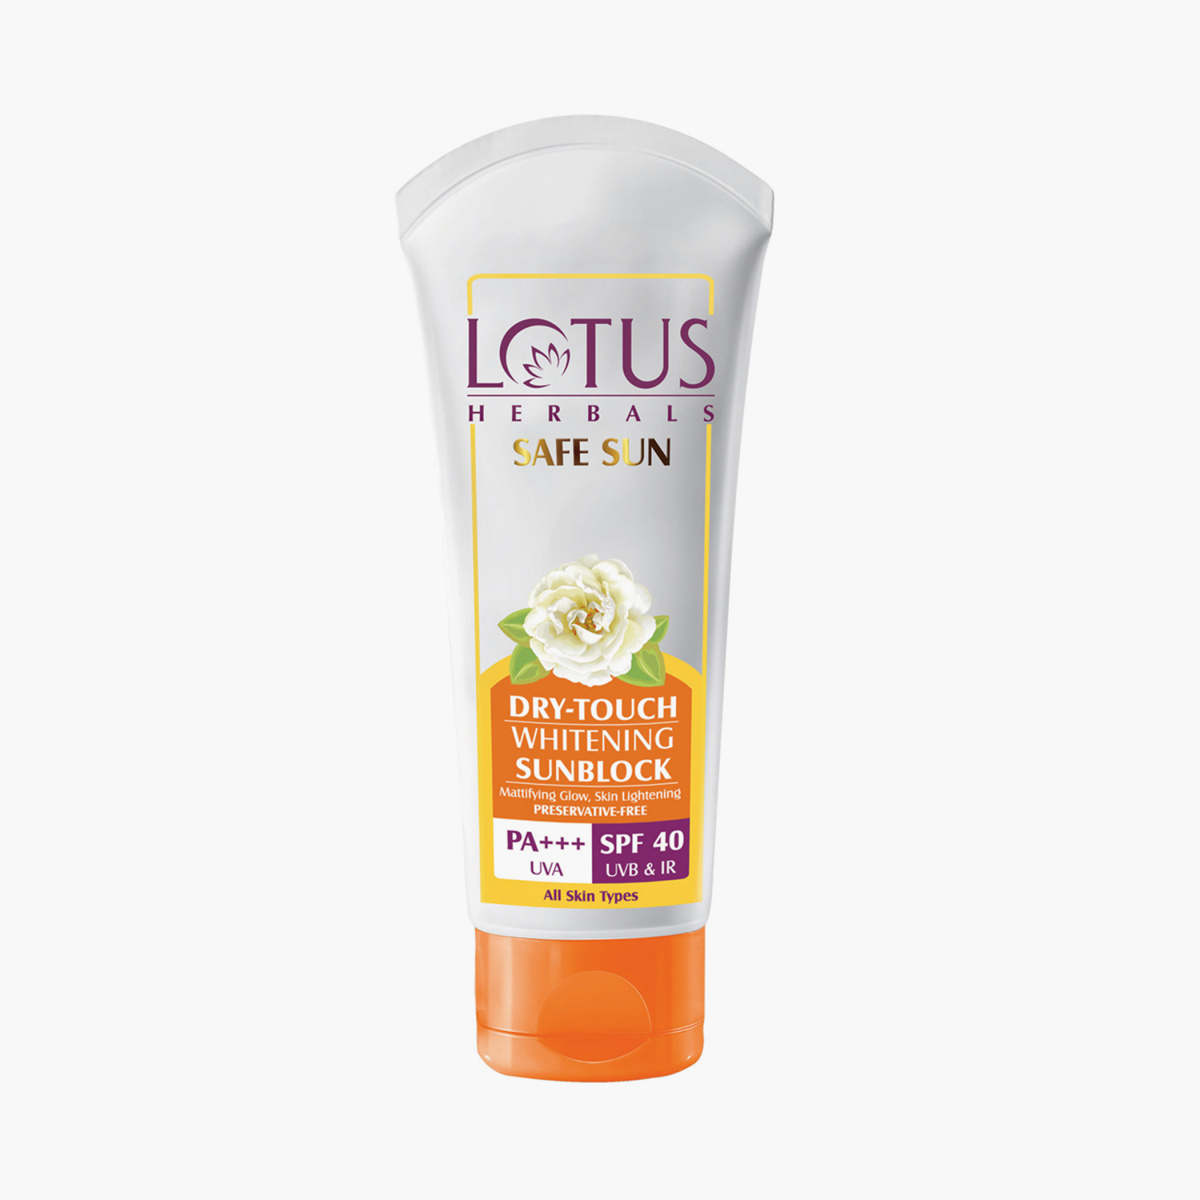 LOTUS Herbals Safe Sun Dry-Touch Whitening Sunblock SPF 40